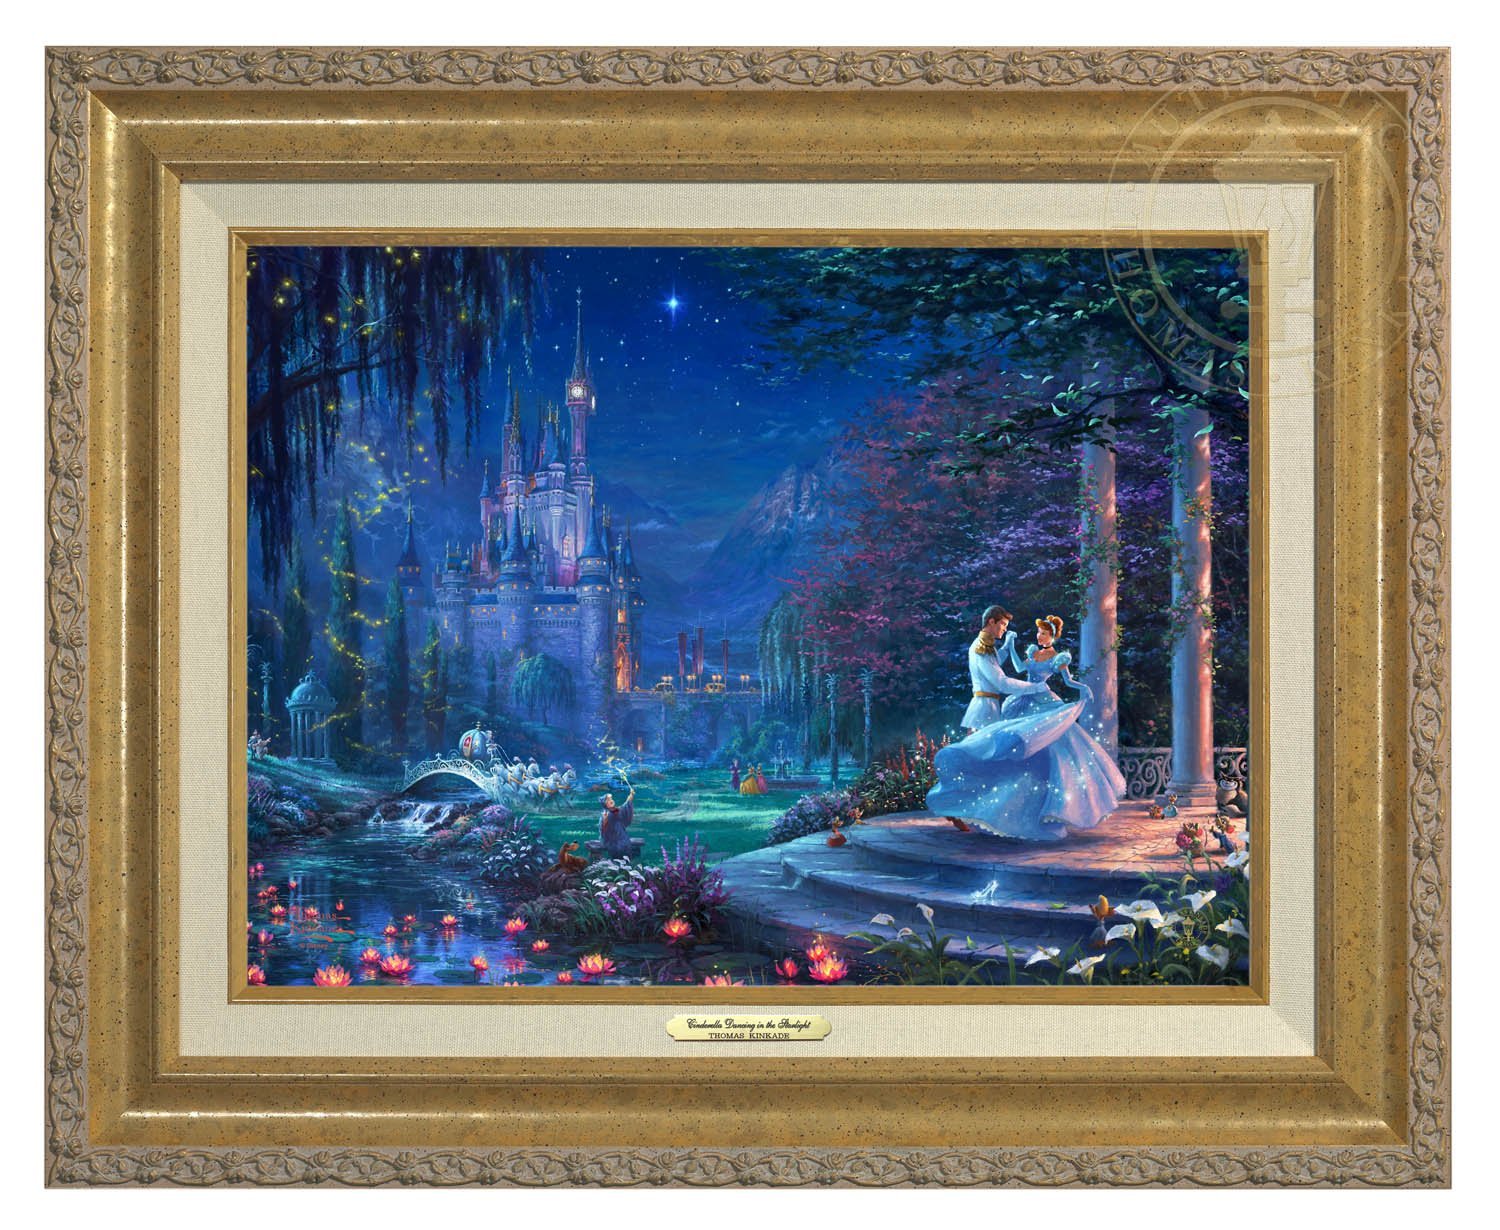 Cinderella Dancing in the Starlight by Thomas Kinkade Studios.  Cinderella's dreams have come true under the starlight Cinderella is dancing with her prince - Antique Gold Frame